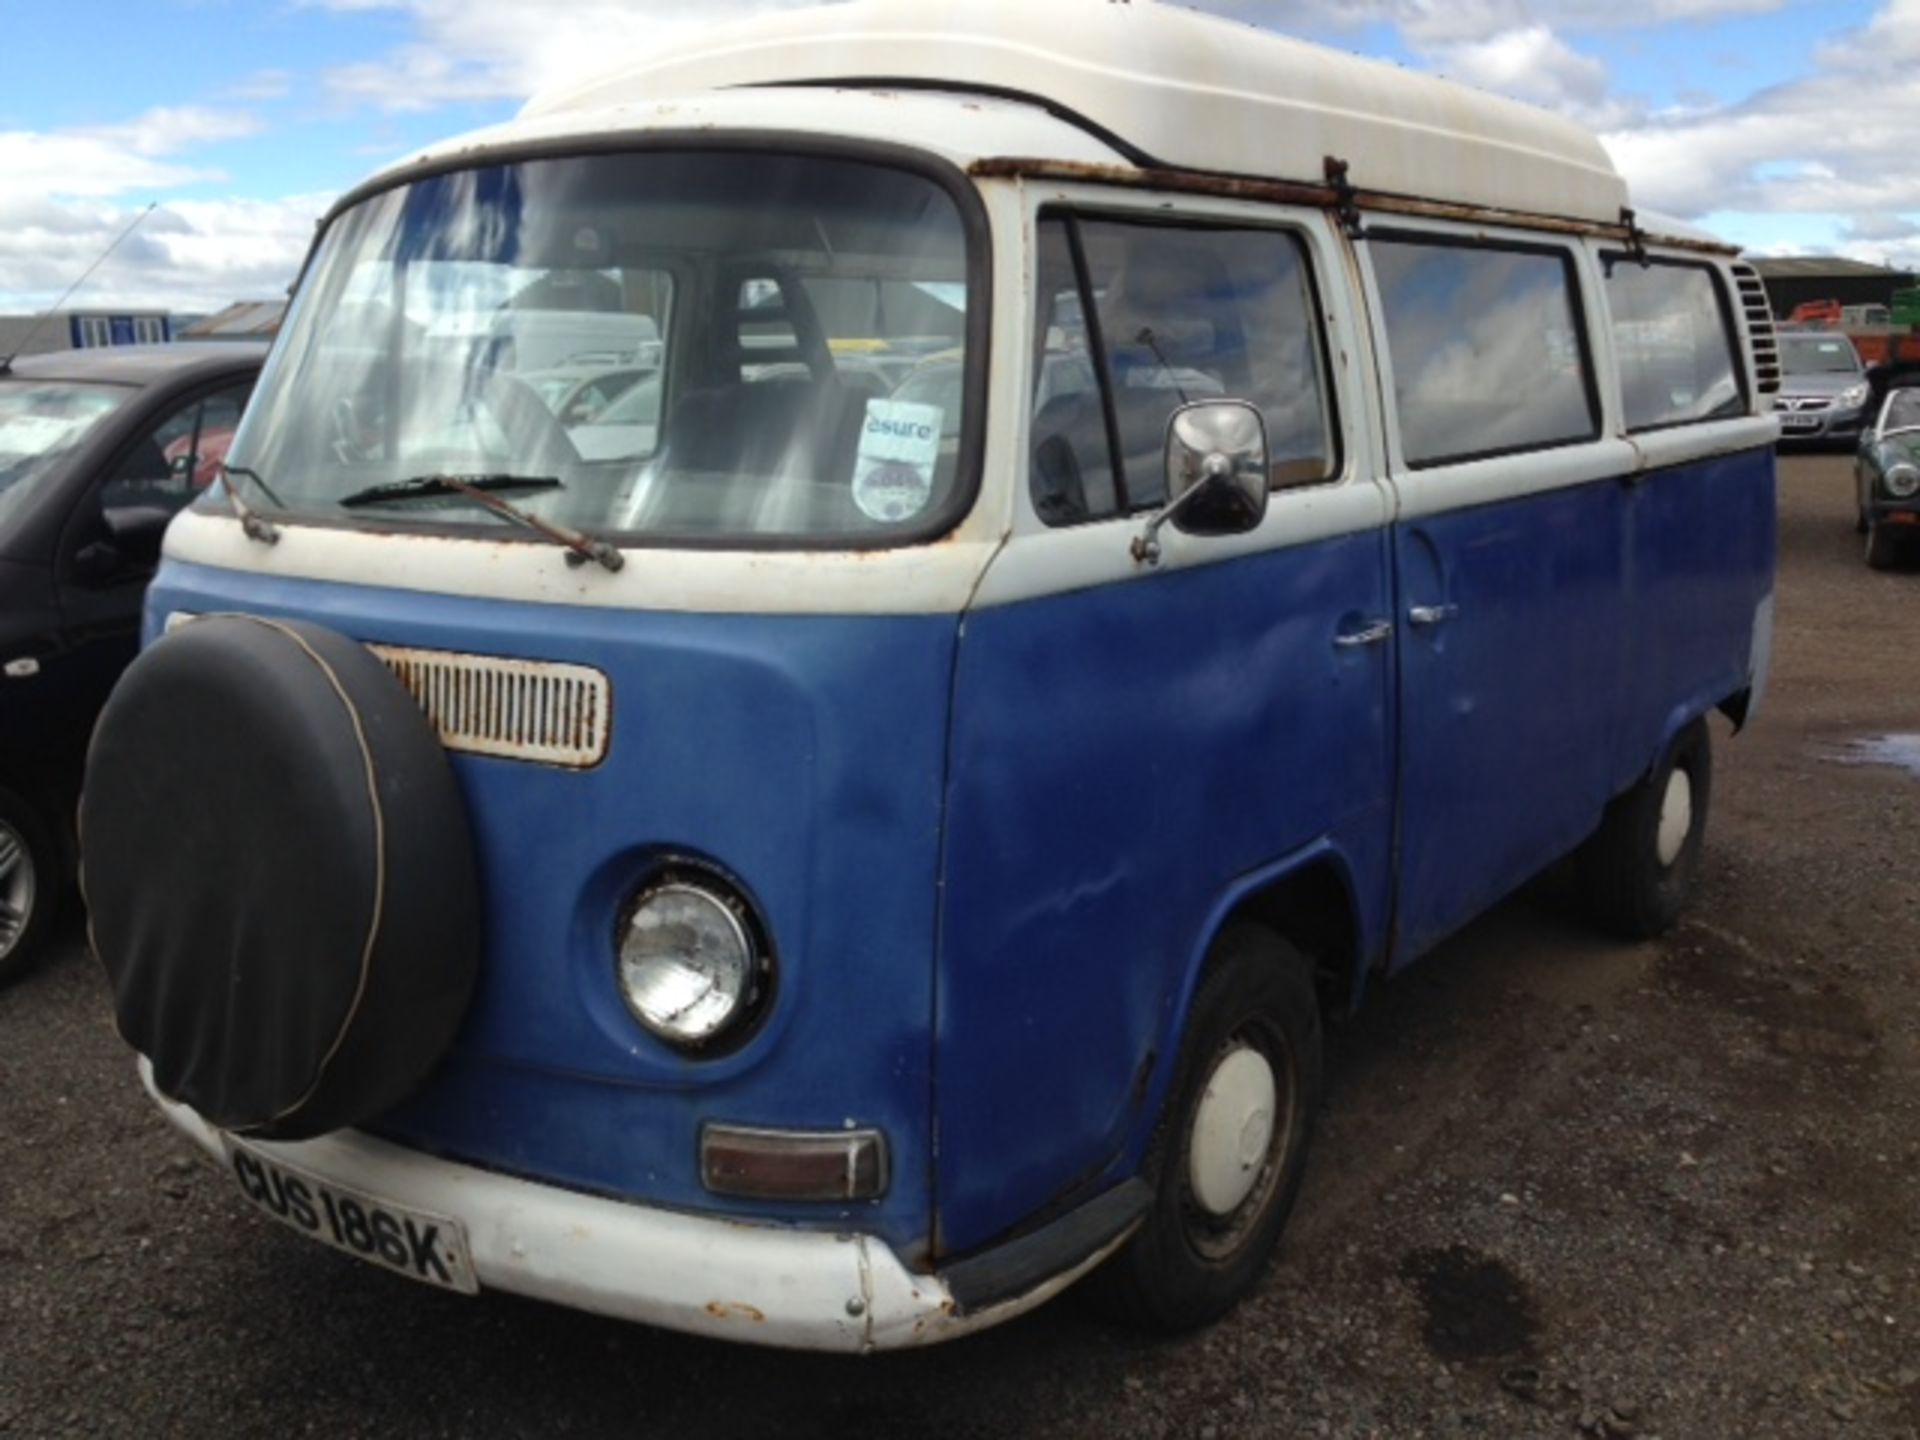 VOLKSWAGEN, T2 - 1584cc, Chassis number 2322053753 - this example requires restoration but appears